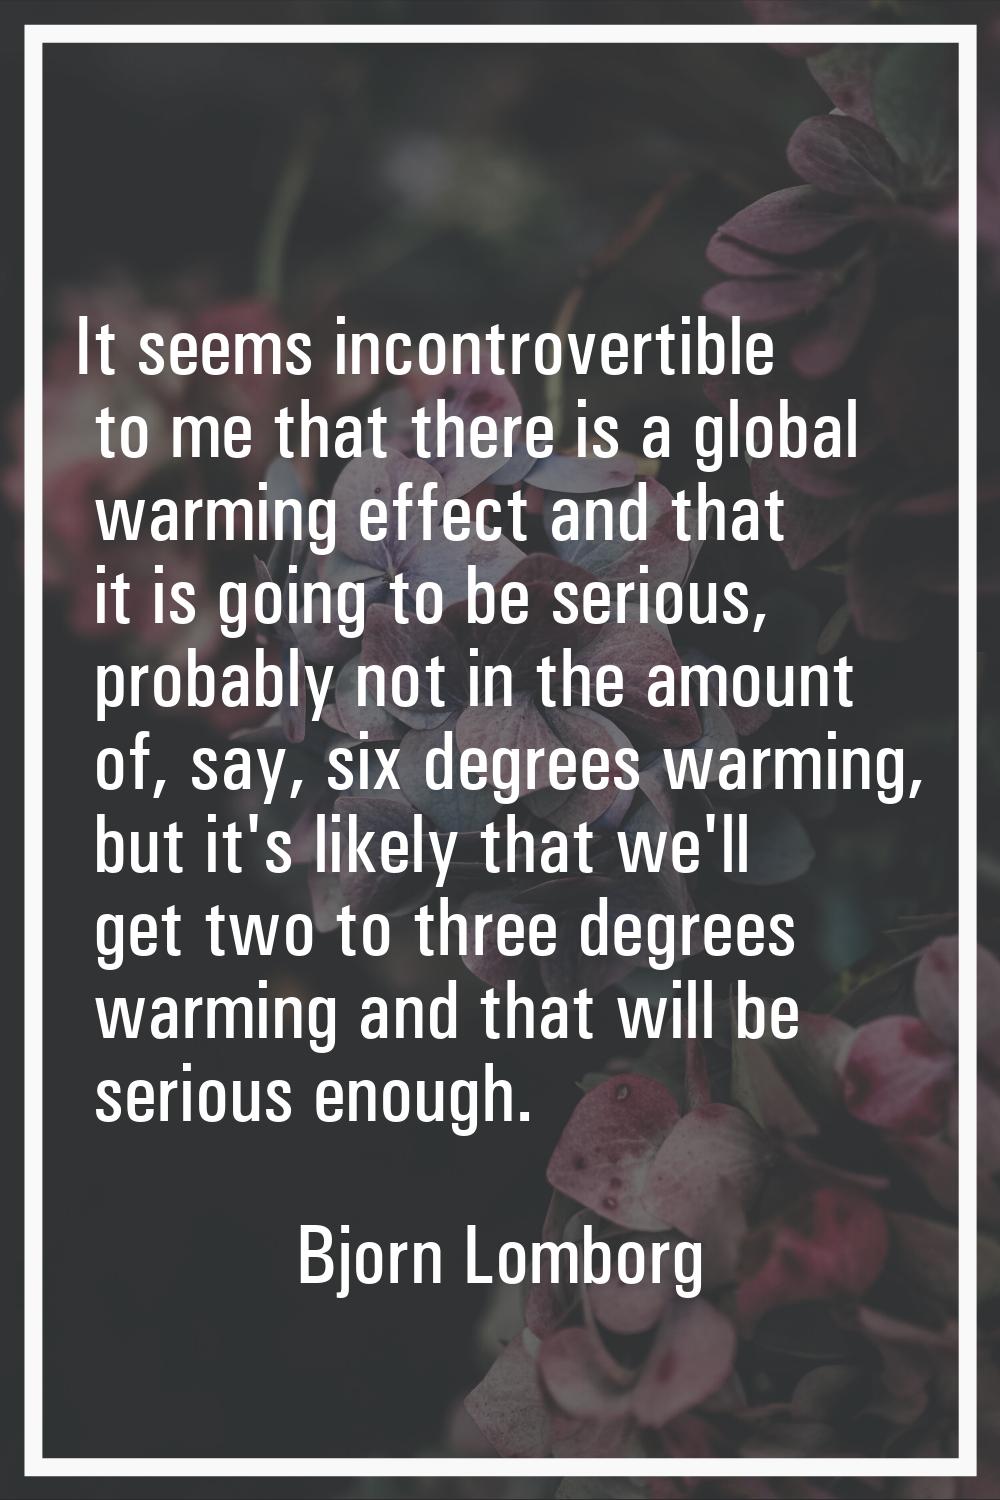 It seems incontrovertible to me that there is a global warming effect and that it is going to be se